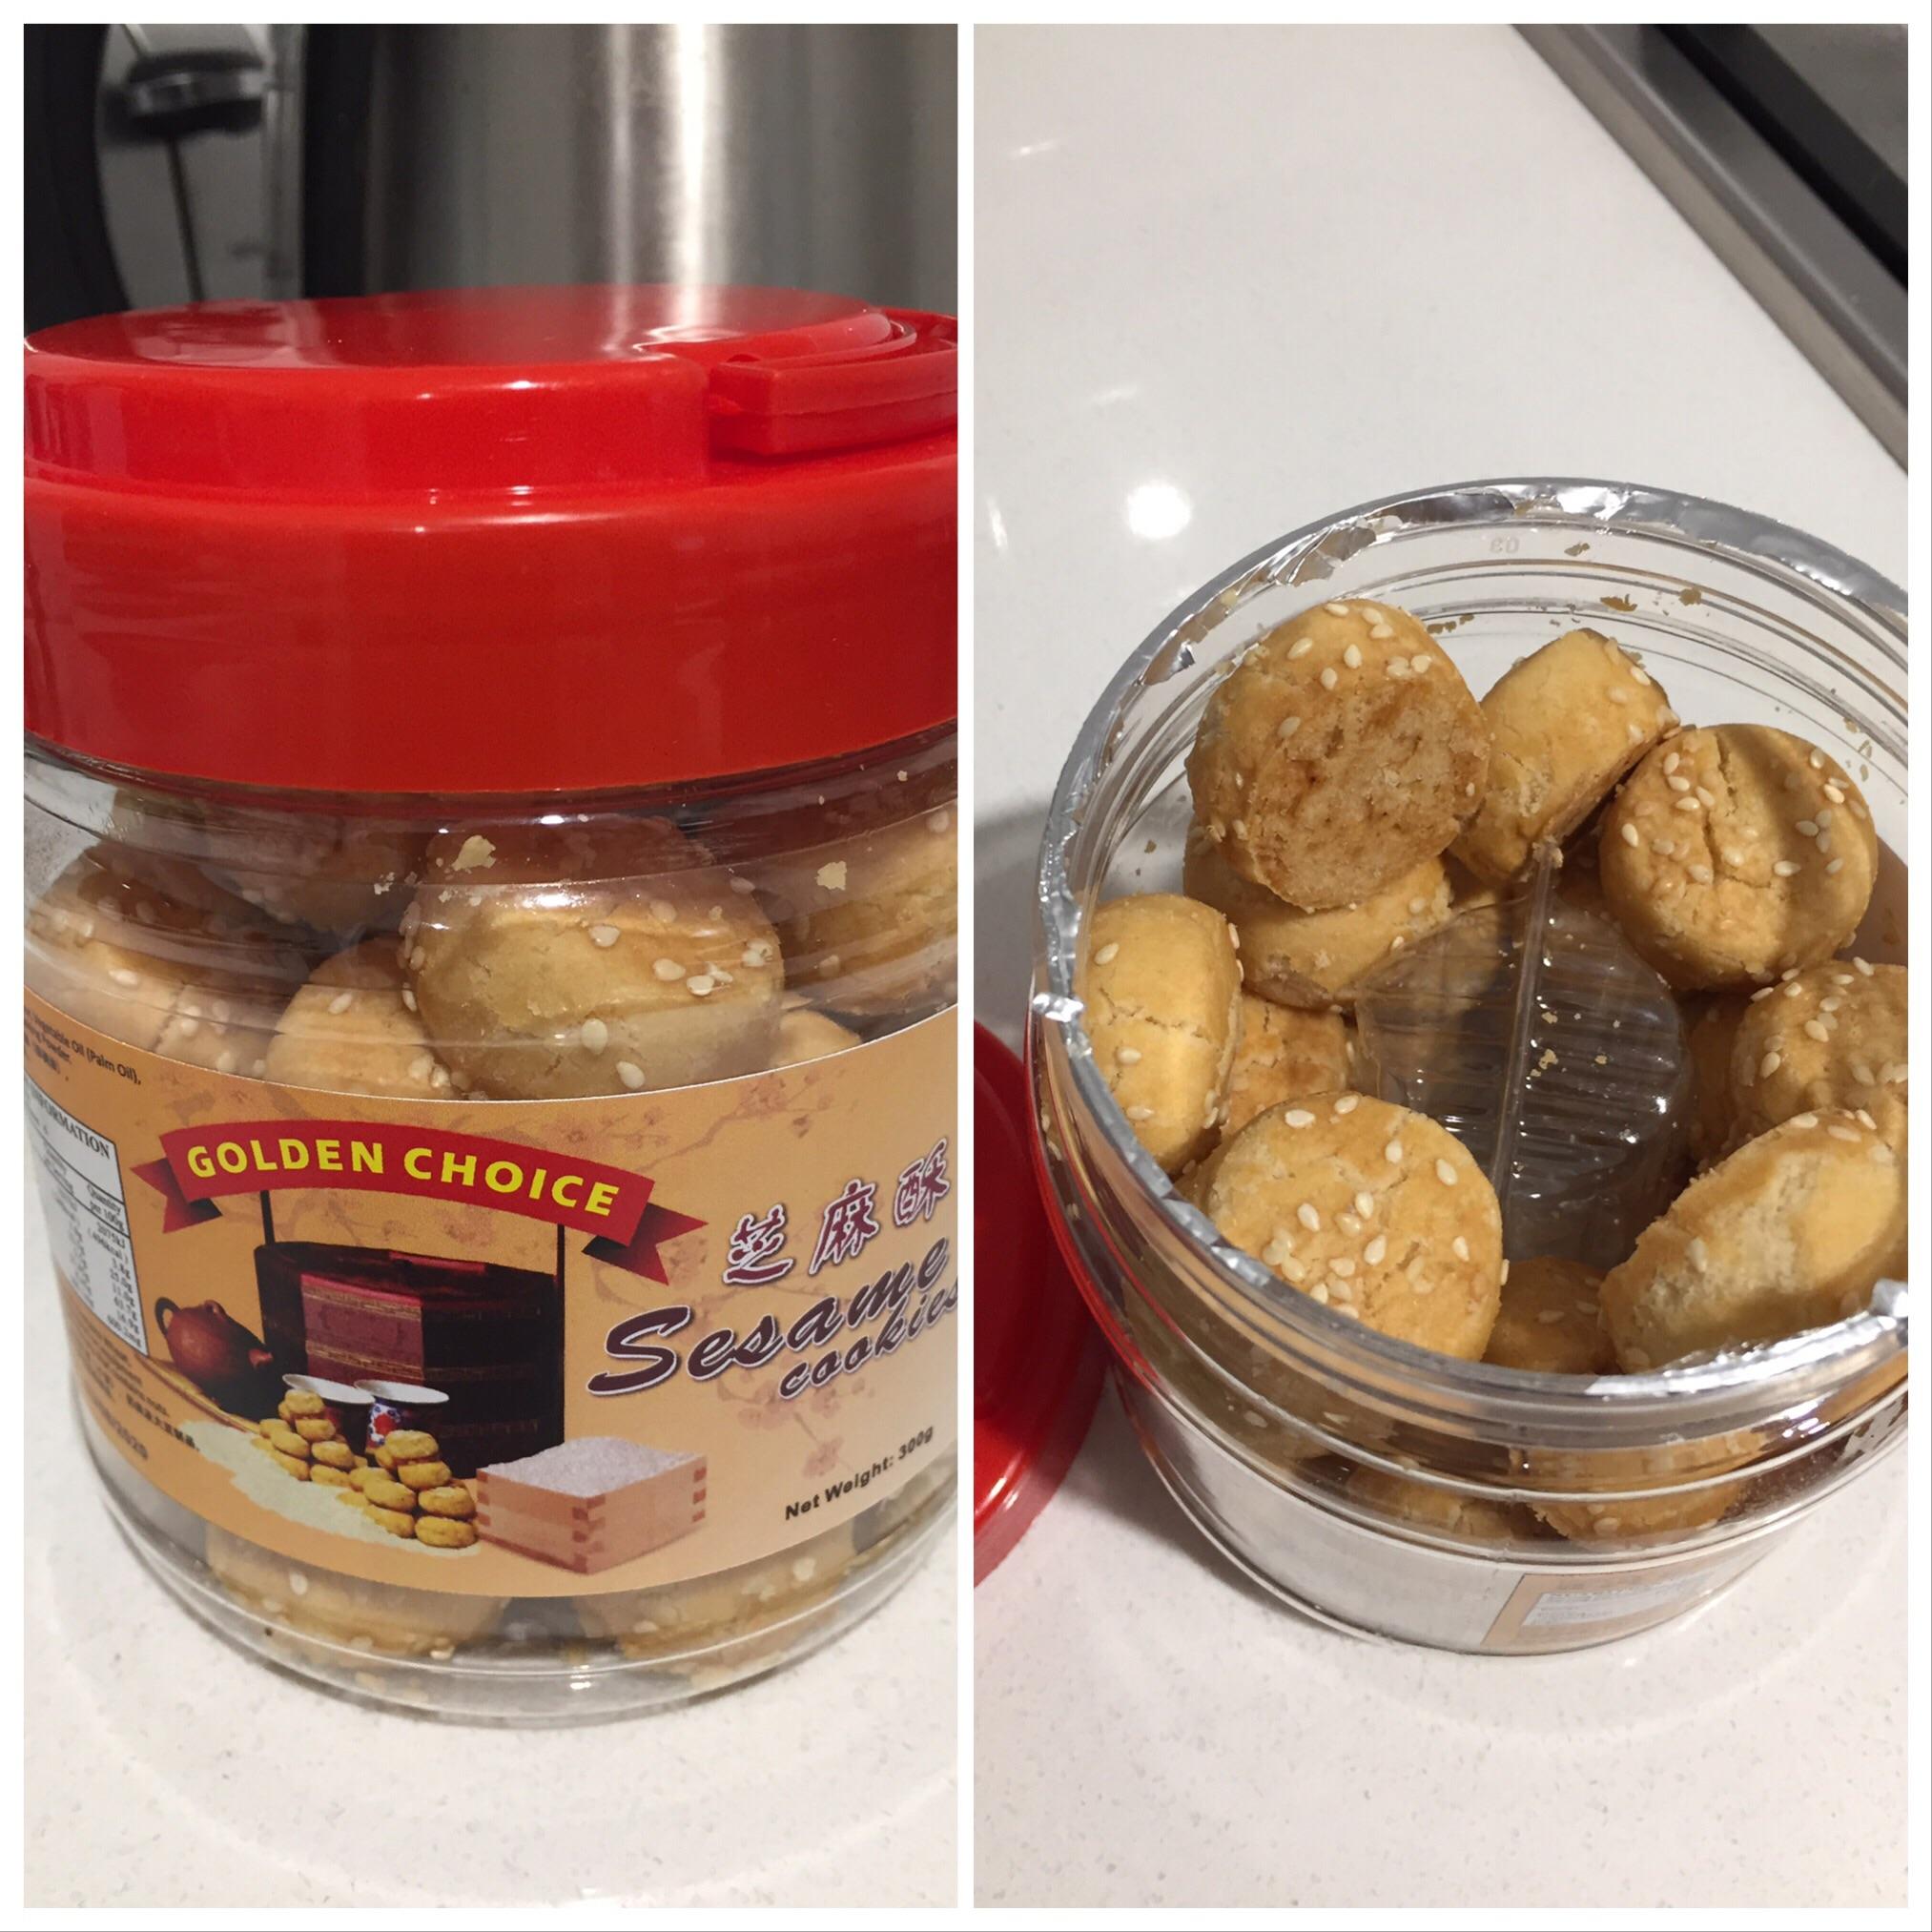 Unless you turned over the container of sesame cookies you'd have no way of knowing that the entire container isn't completely filled until you opened it. 